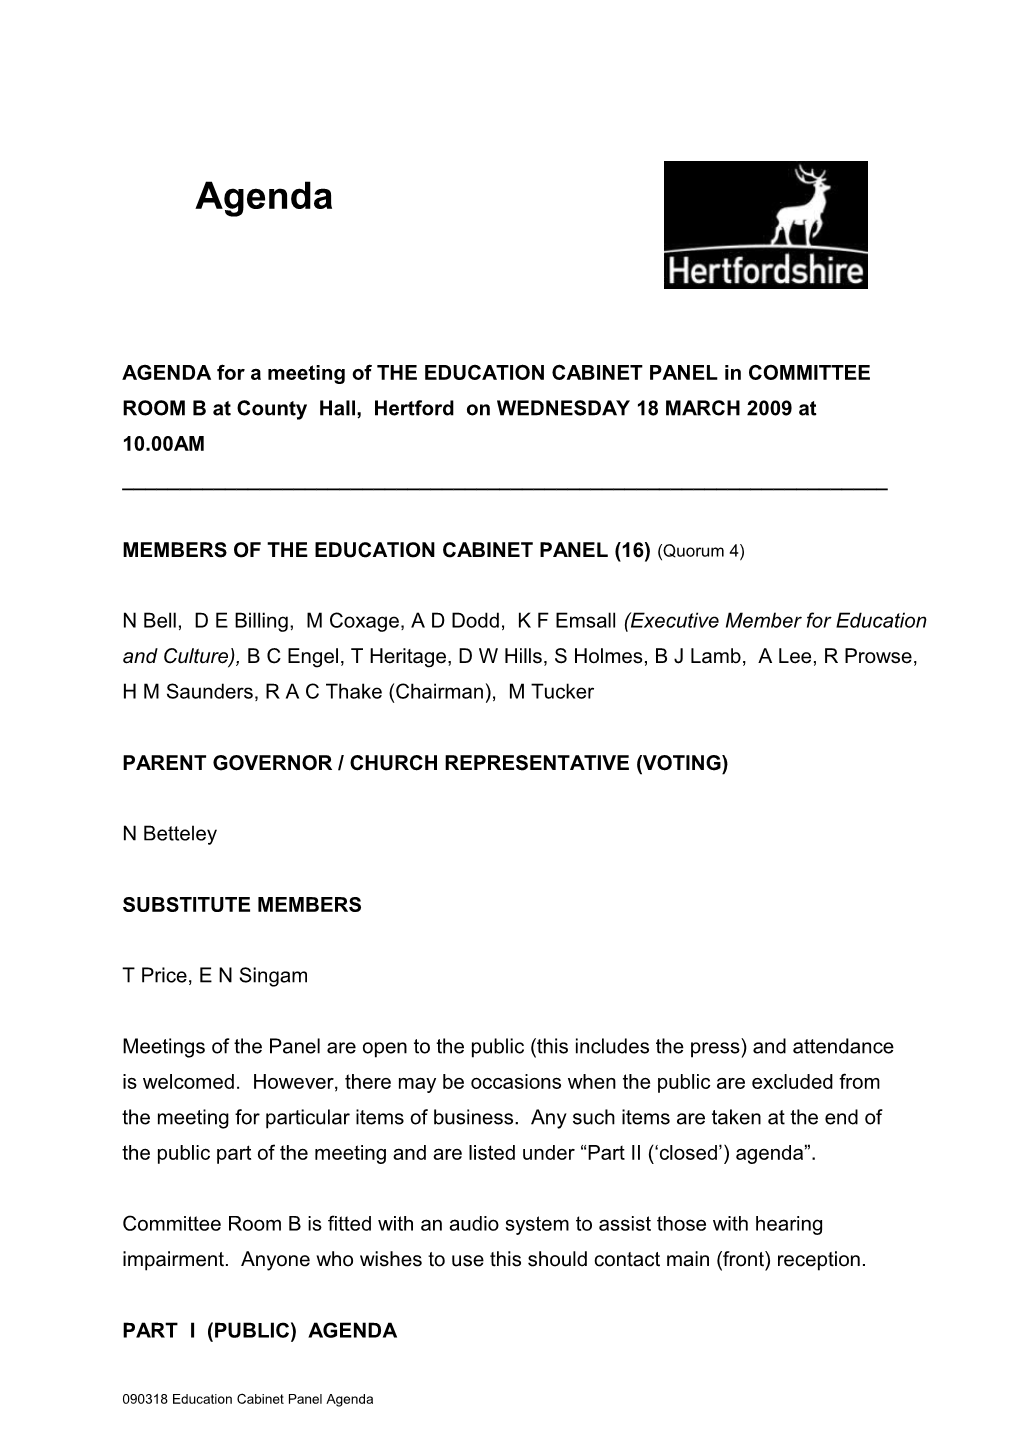 Agenda for a Meeting of the Education Cabinet Panel to Be Held on Wednesday 18 March 2009